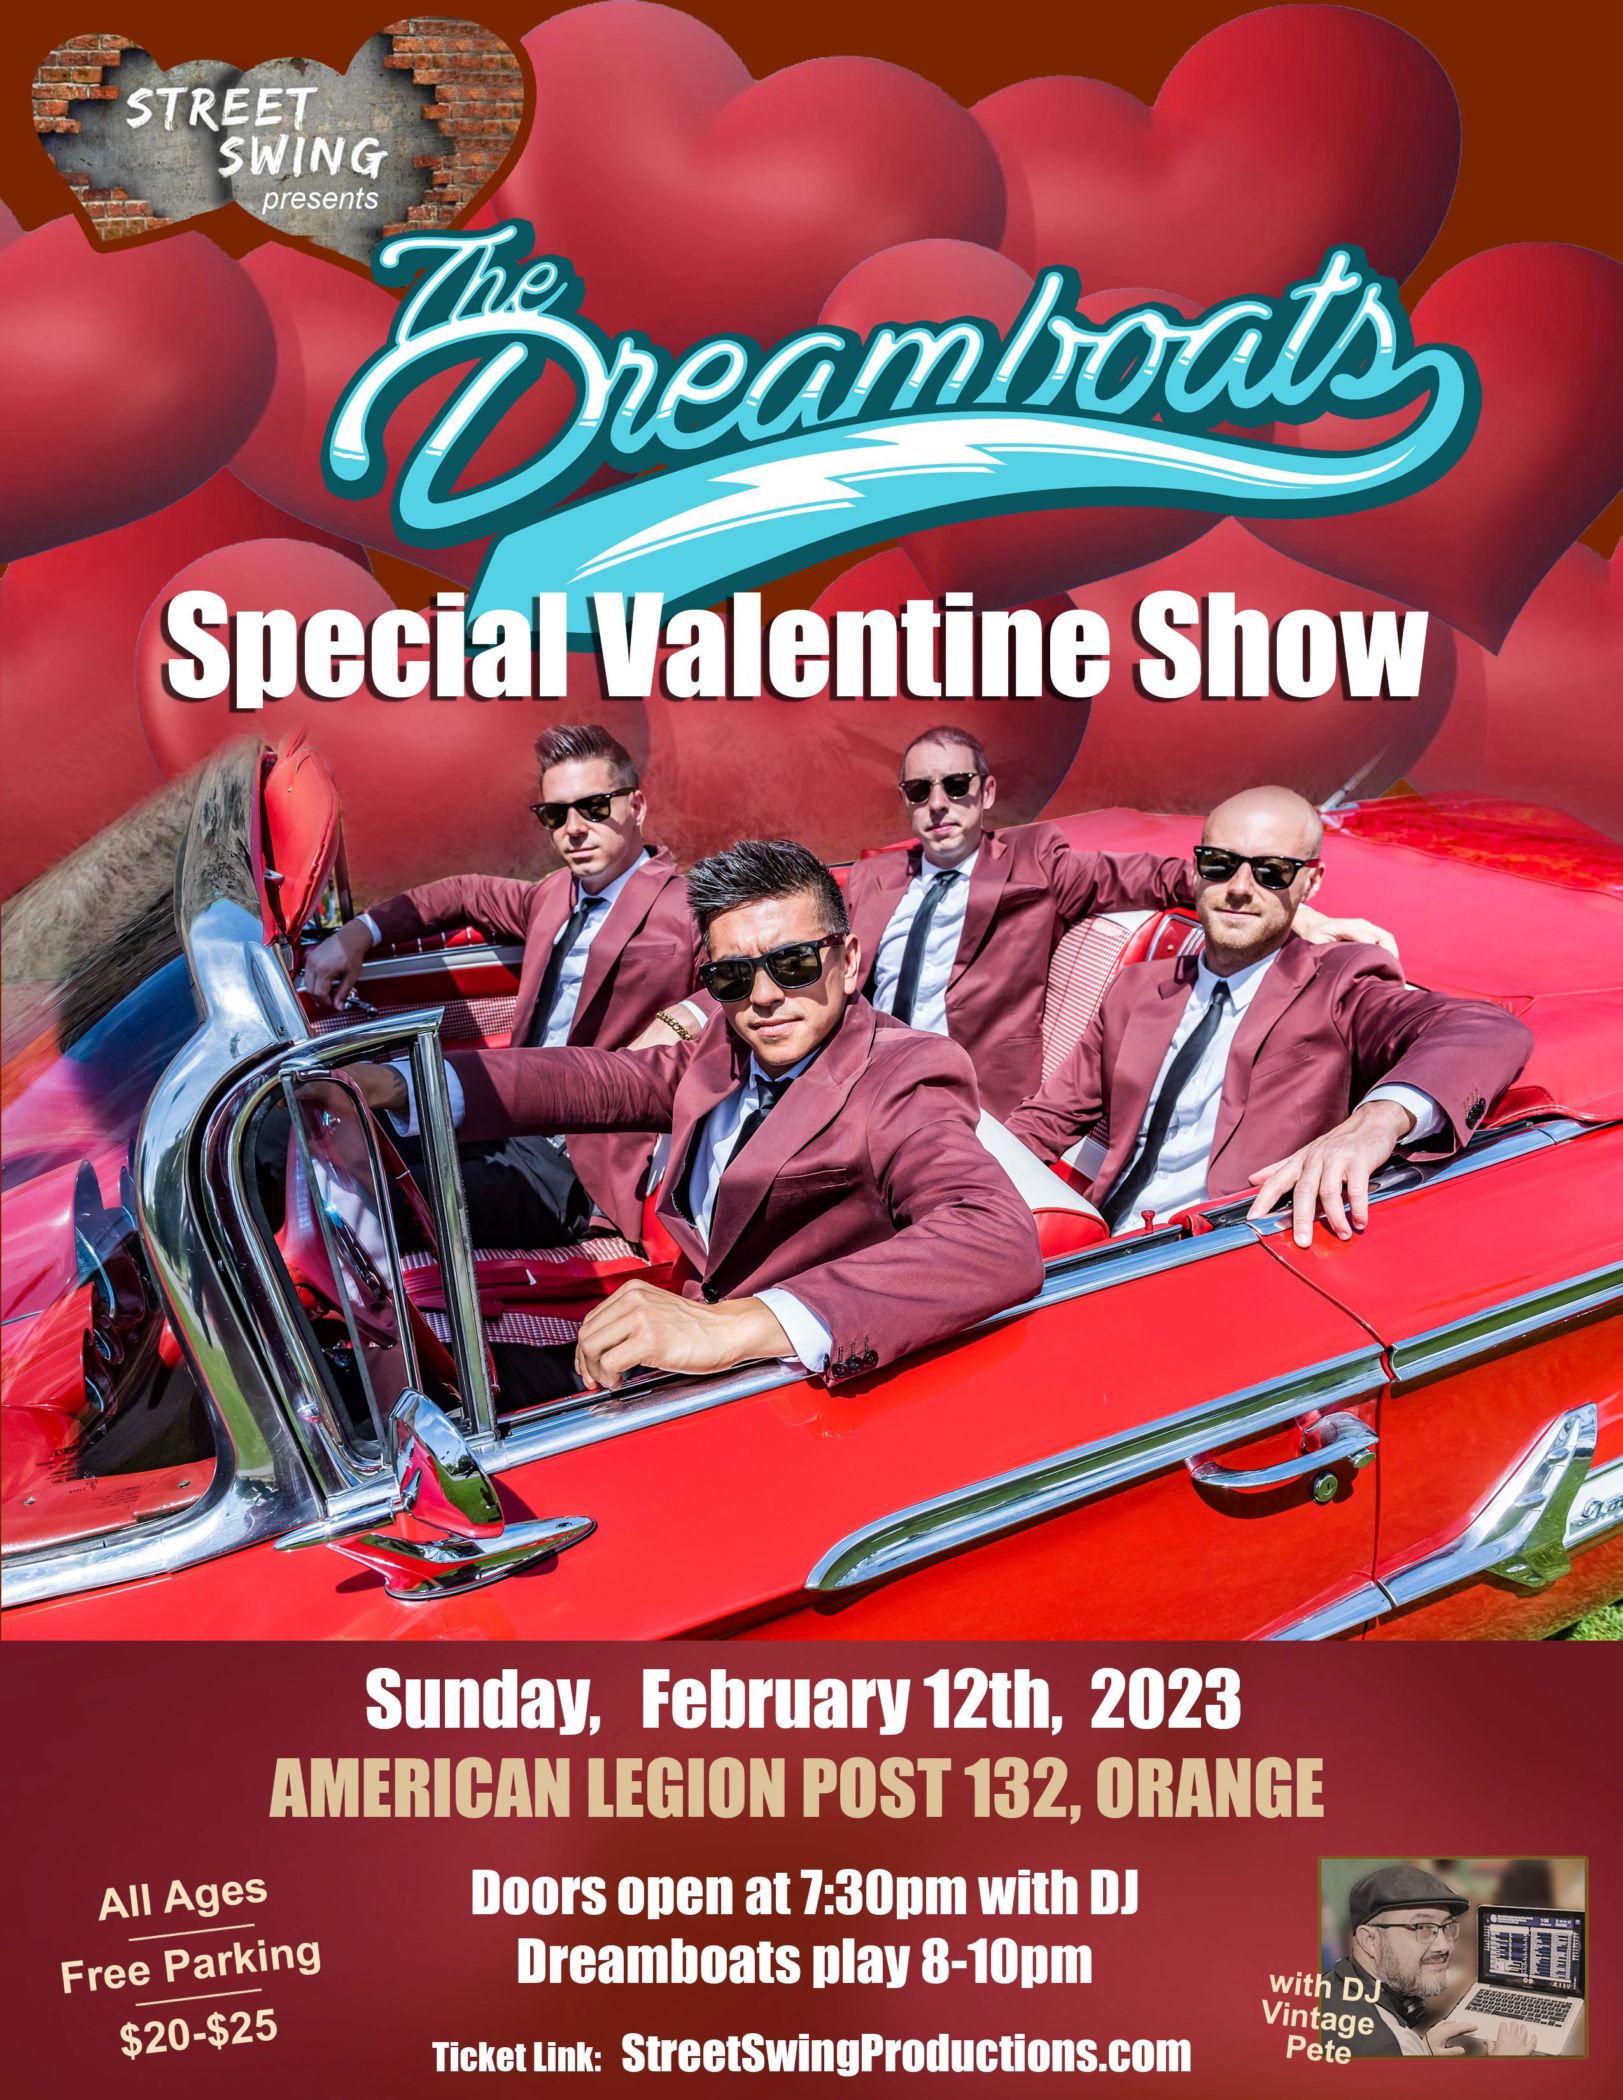 The Dreamboats Valentine Show